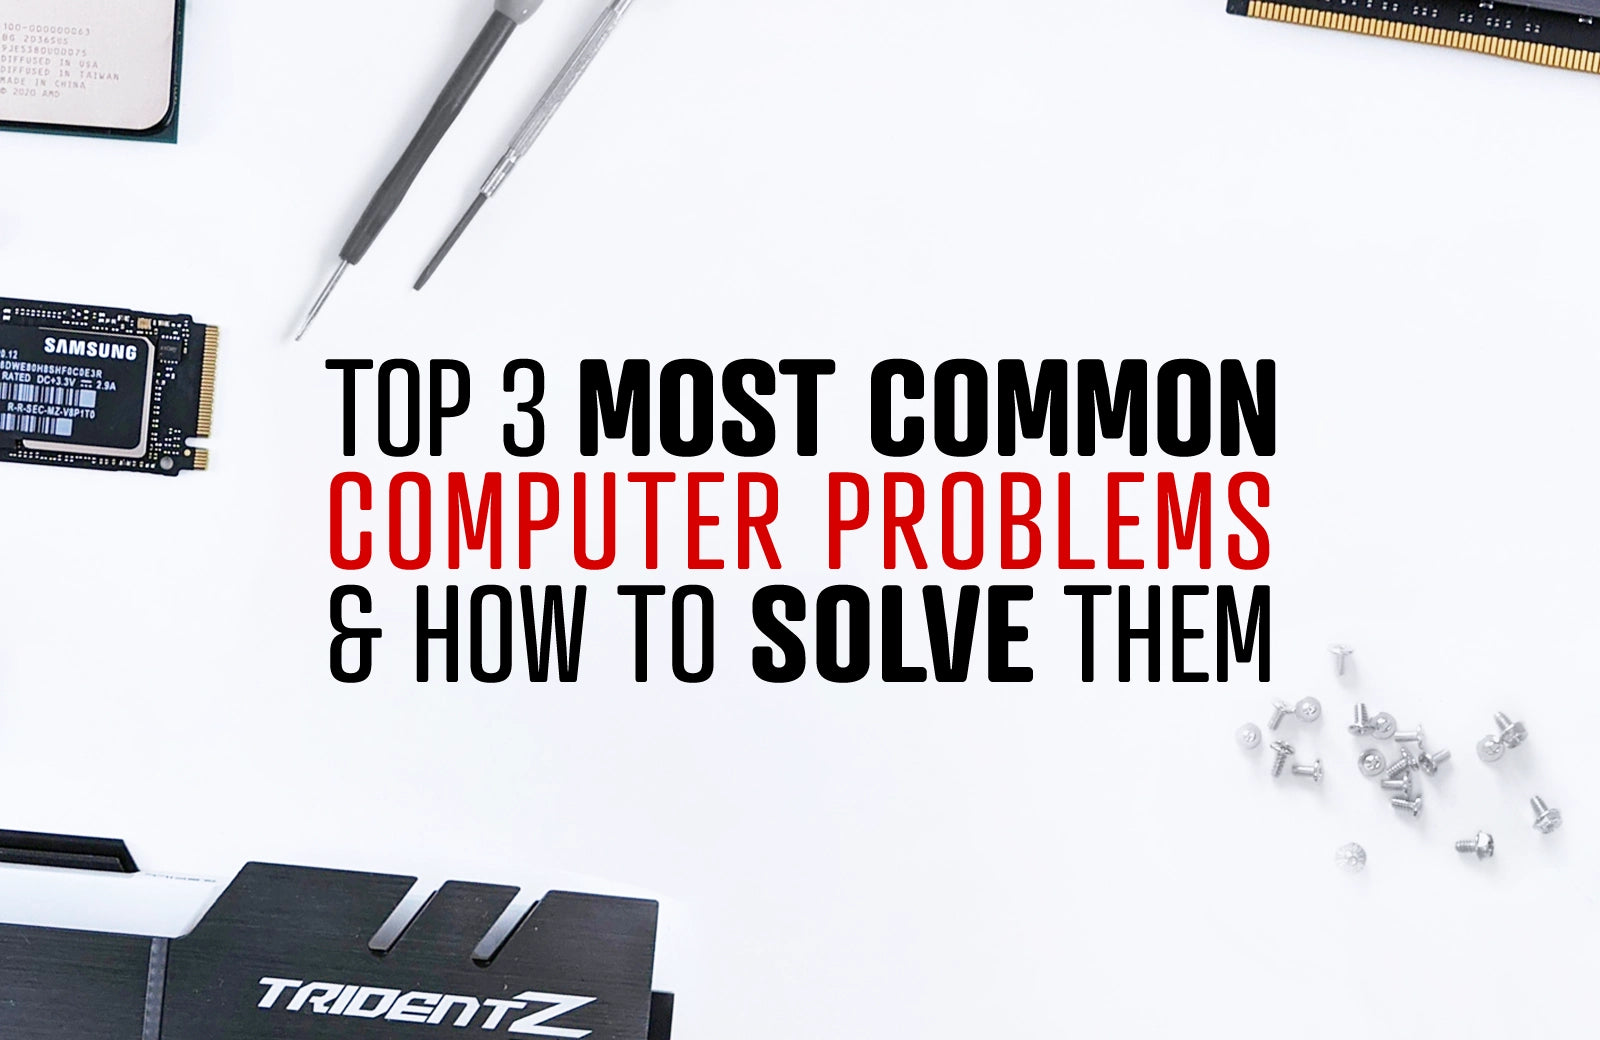 Top 3 Most Common Computer Problems and How to Solve Them